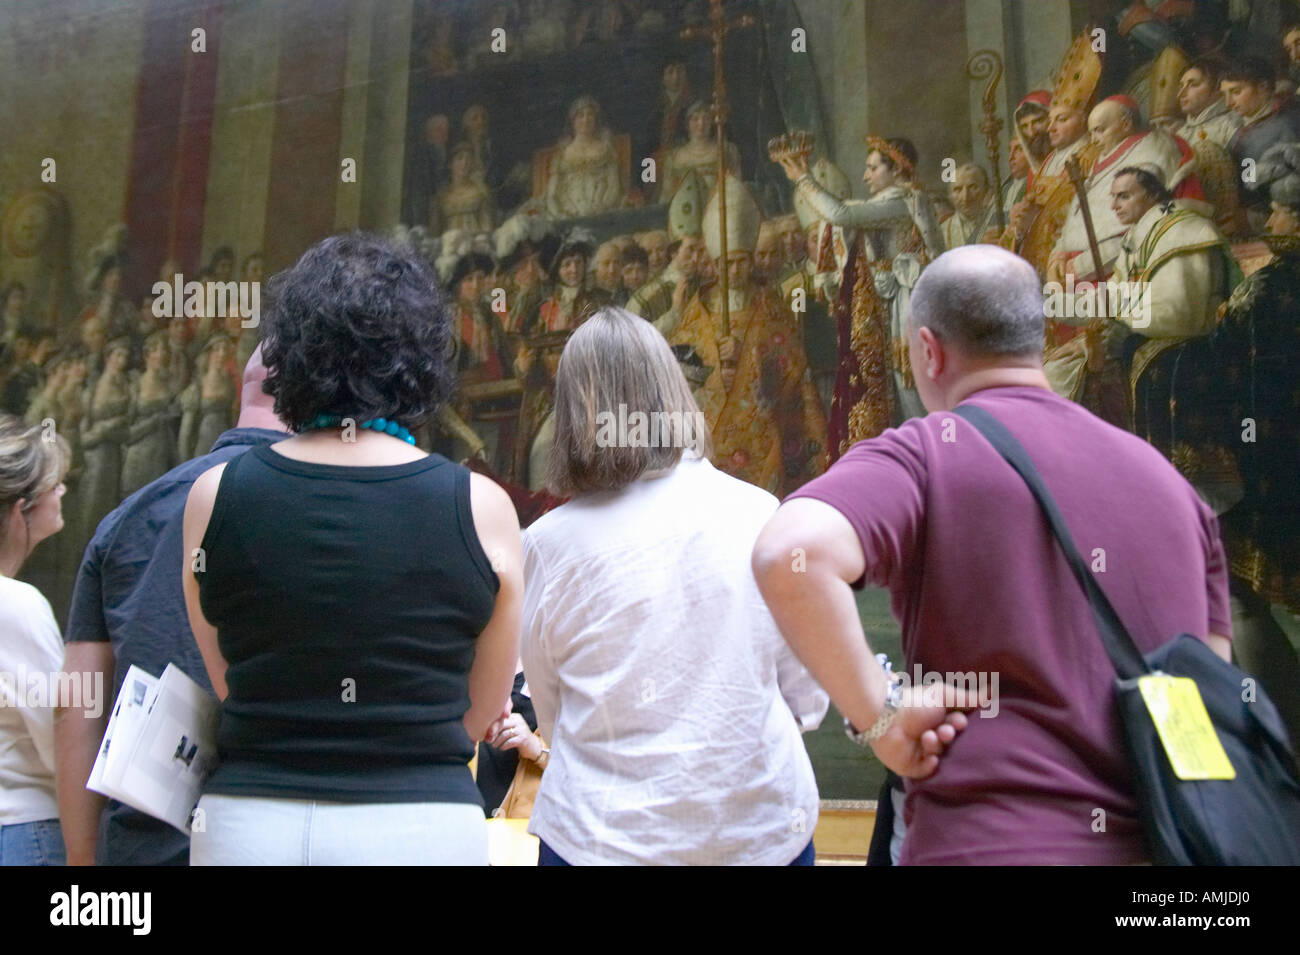 Museum goers viewing The Coronation of Napoleon by Jacques Louis David 1808 at the Louvre Museum Paris France Stock Photo